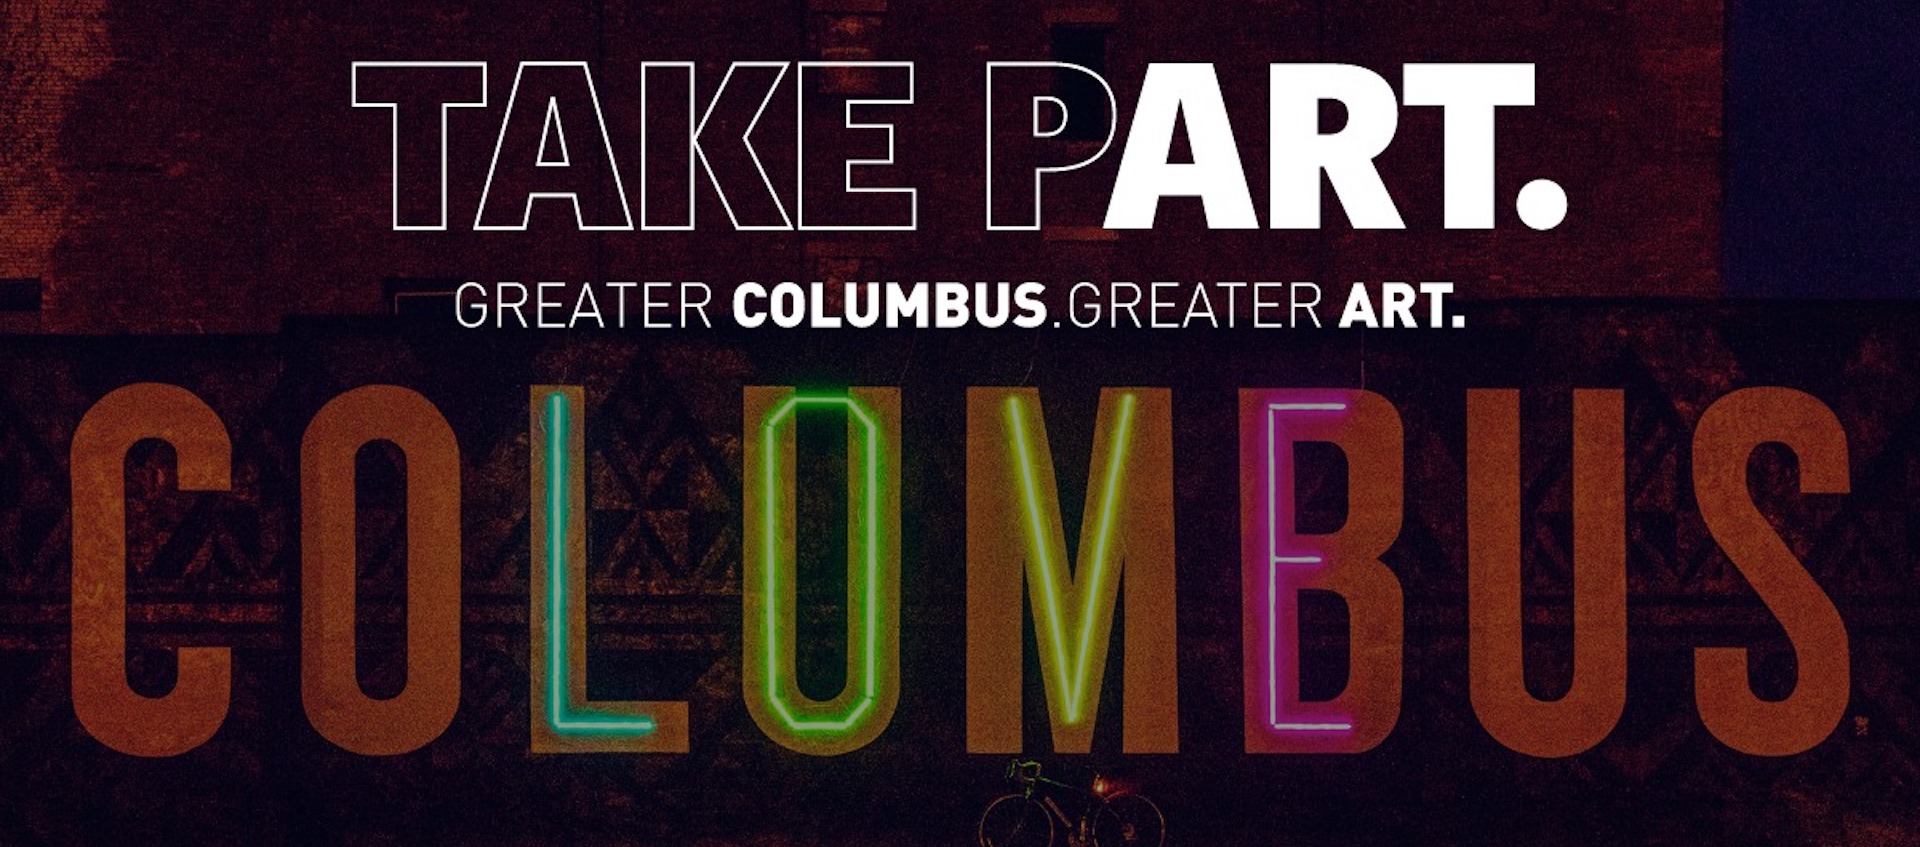 Text reading “Take Part. Greater Columbus. Greater Art” is placed above a public art piece that spells out Columbus with the word “love” embedded in neon in its letters.